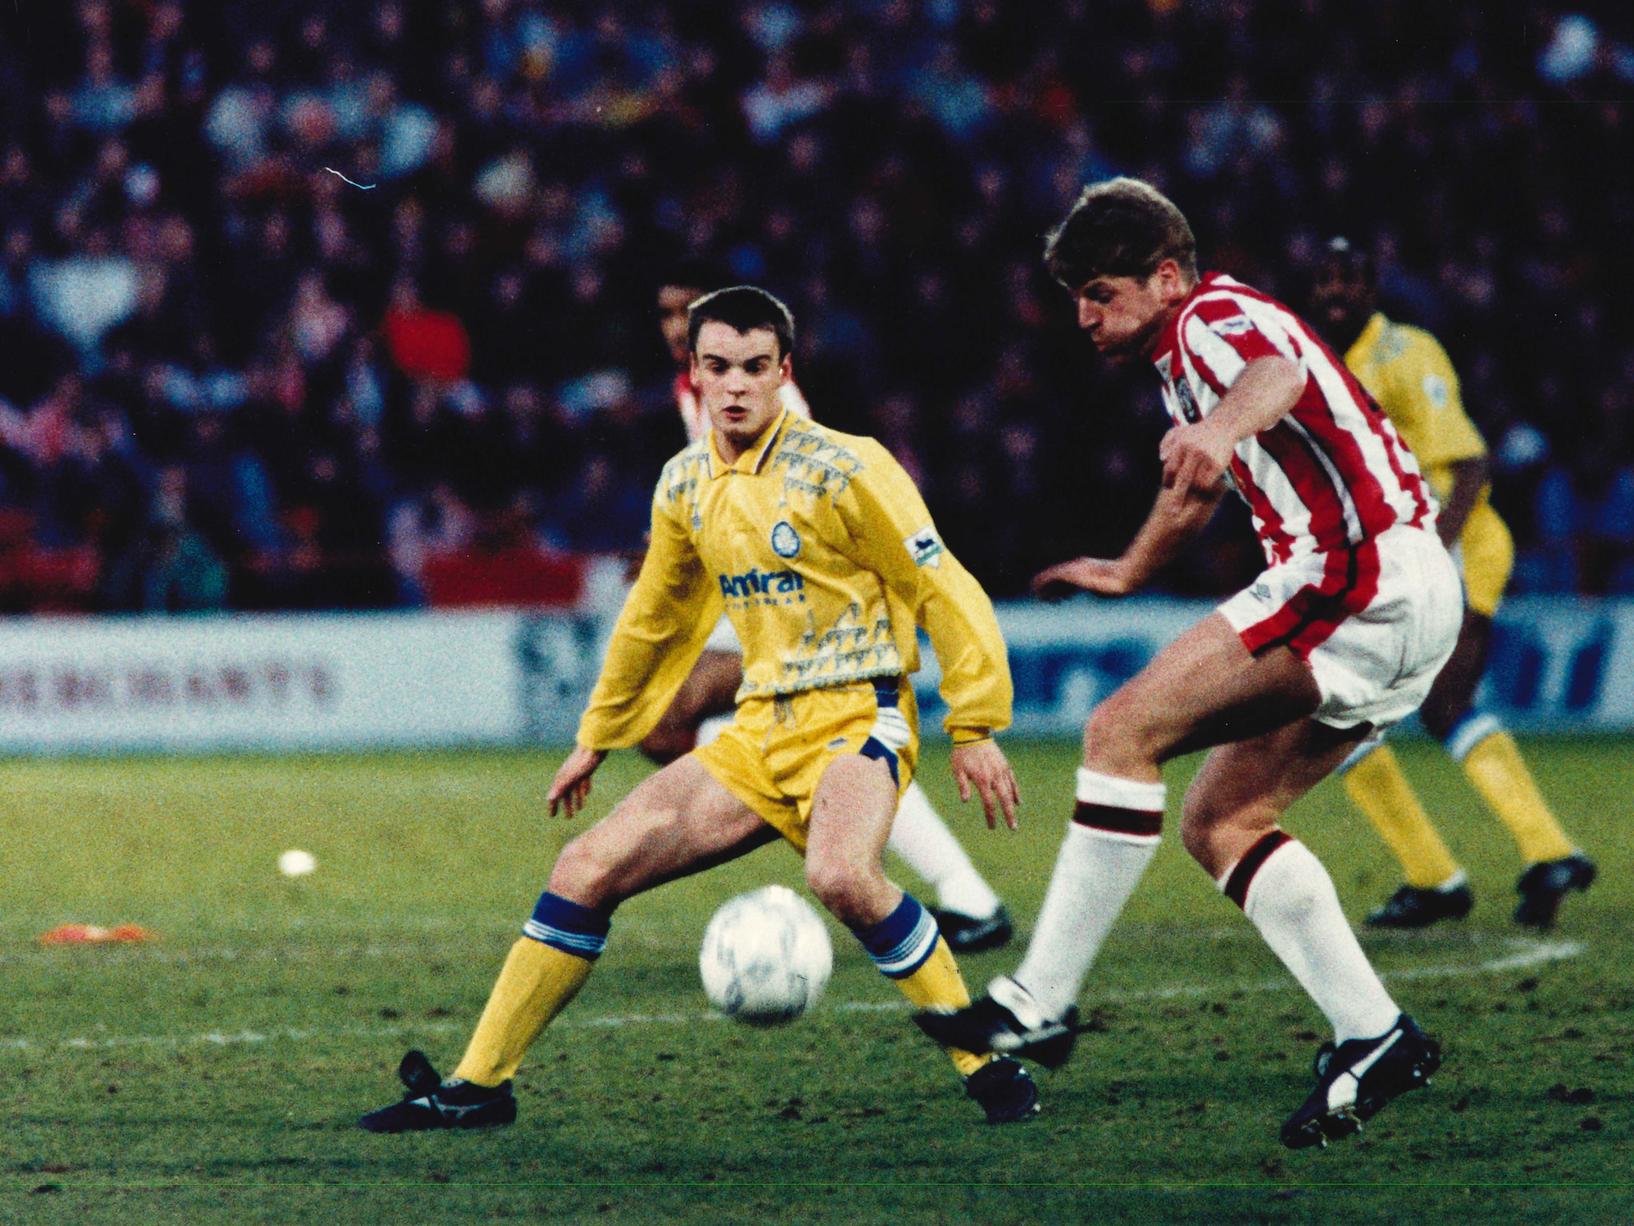 Mark Tinkler in the thick of the action at Bramall Lane. The Blades finished in 14th position that season, two points better off than the Whites.